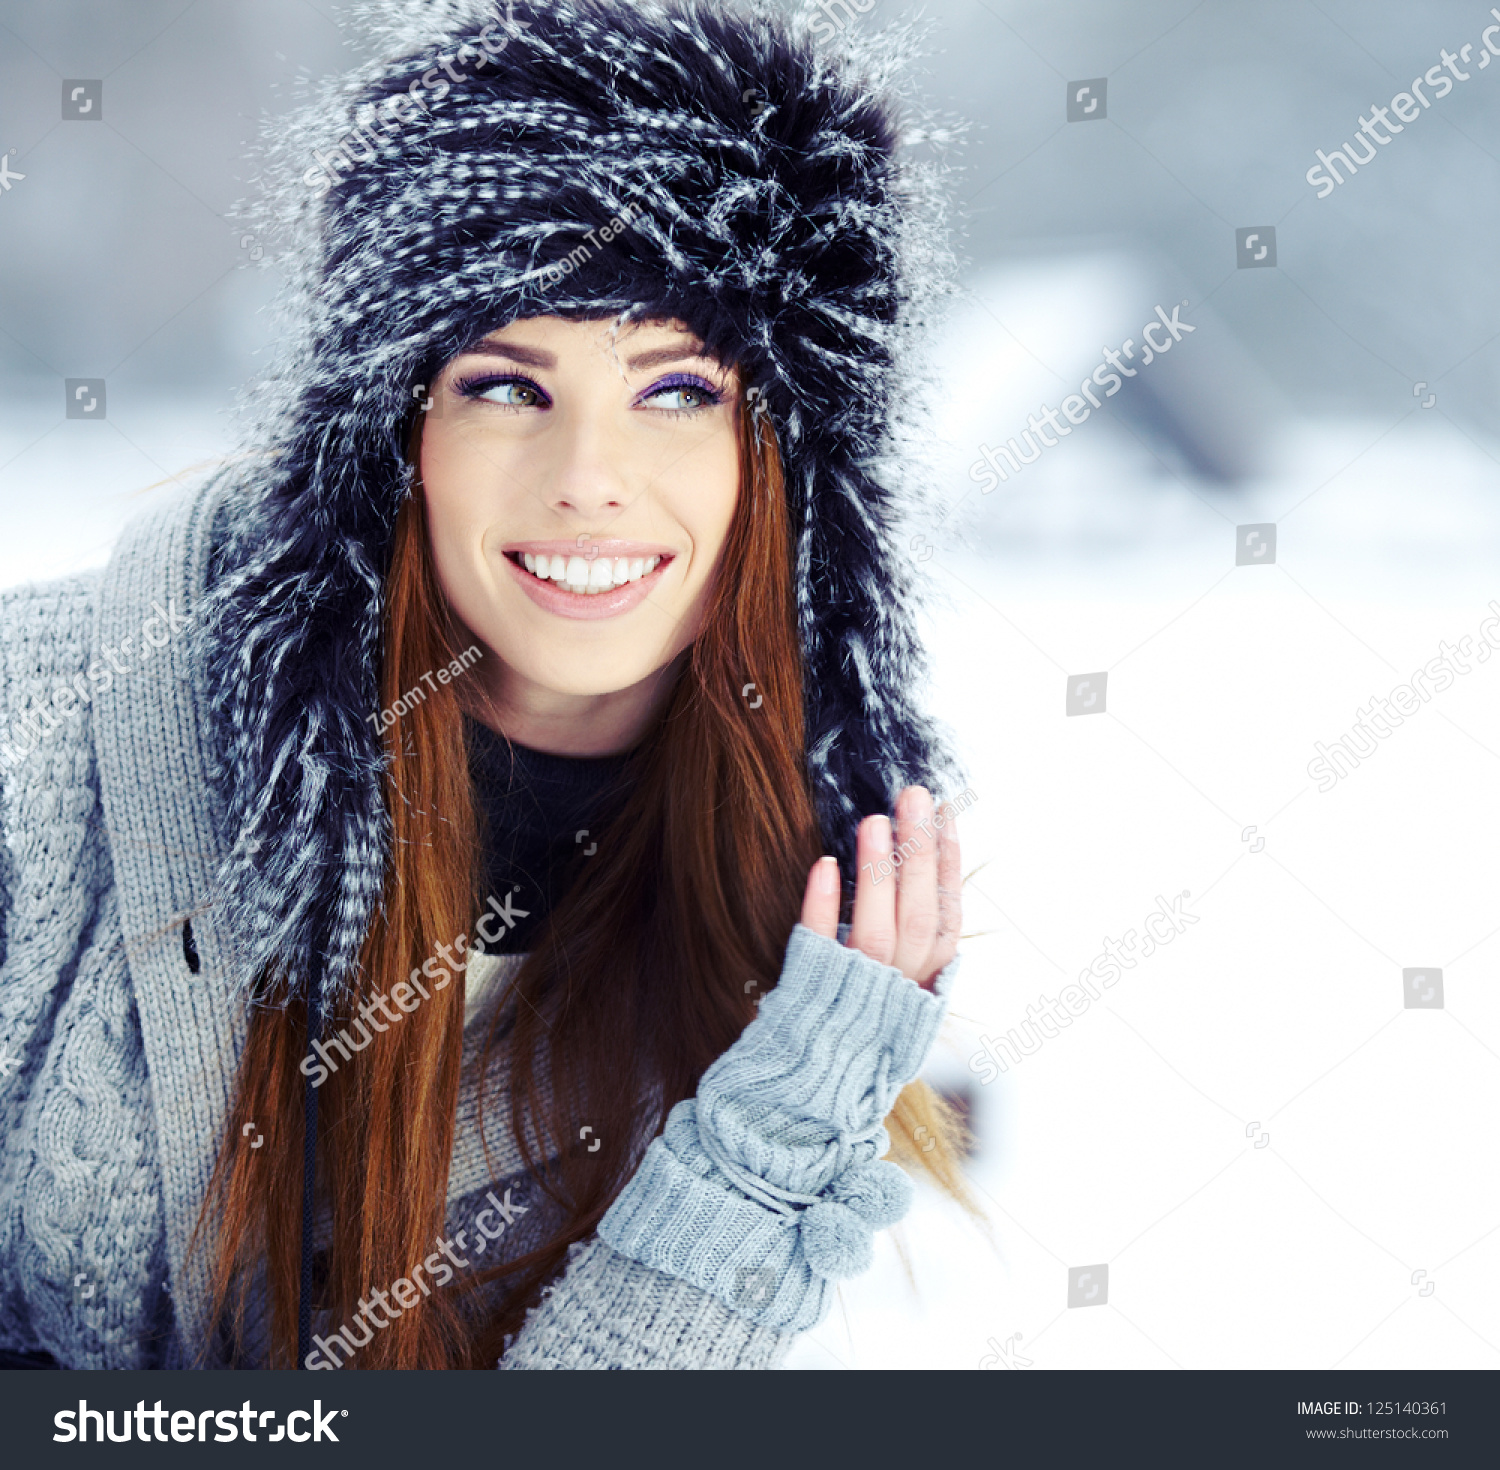 Young Woman Winter Stock Photo (Royalty Free) 125140361 - Shutterstock